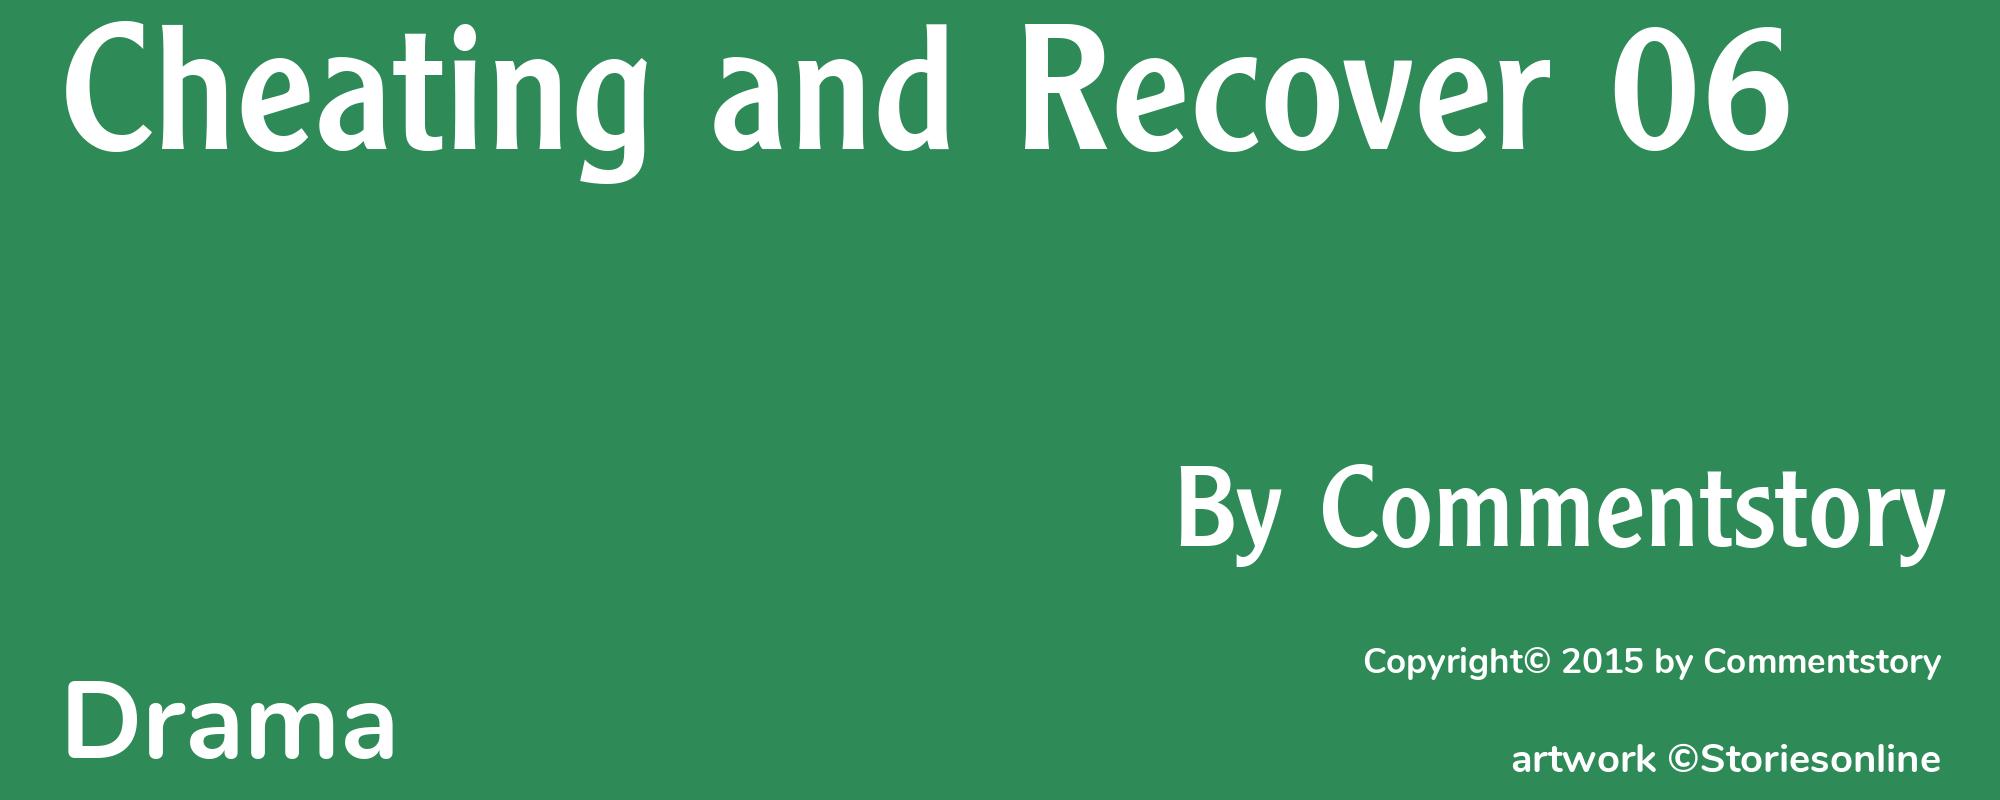 Cheating and Recover 06 - Cover